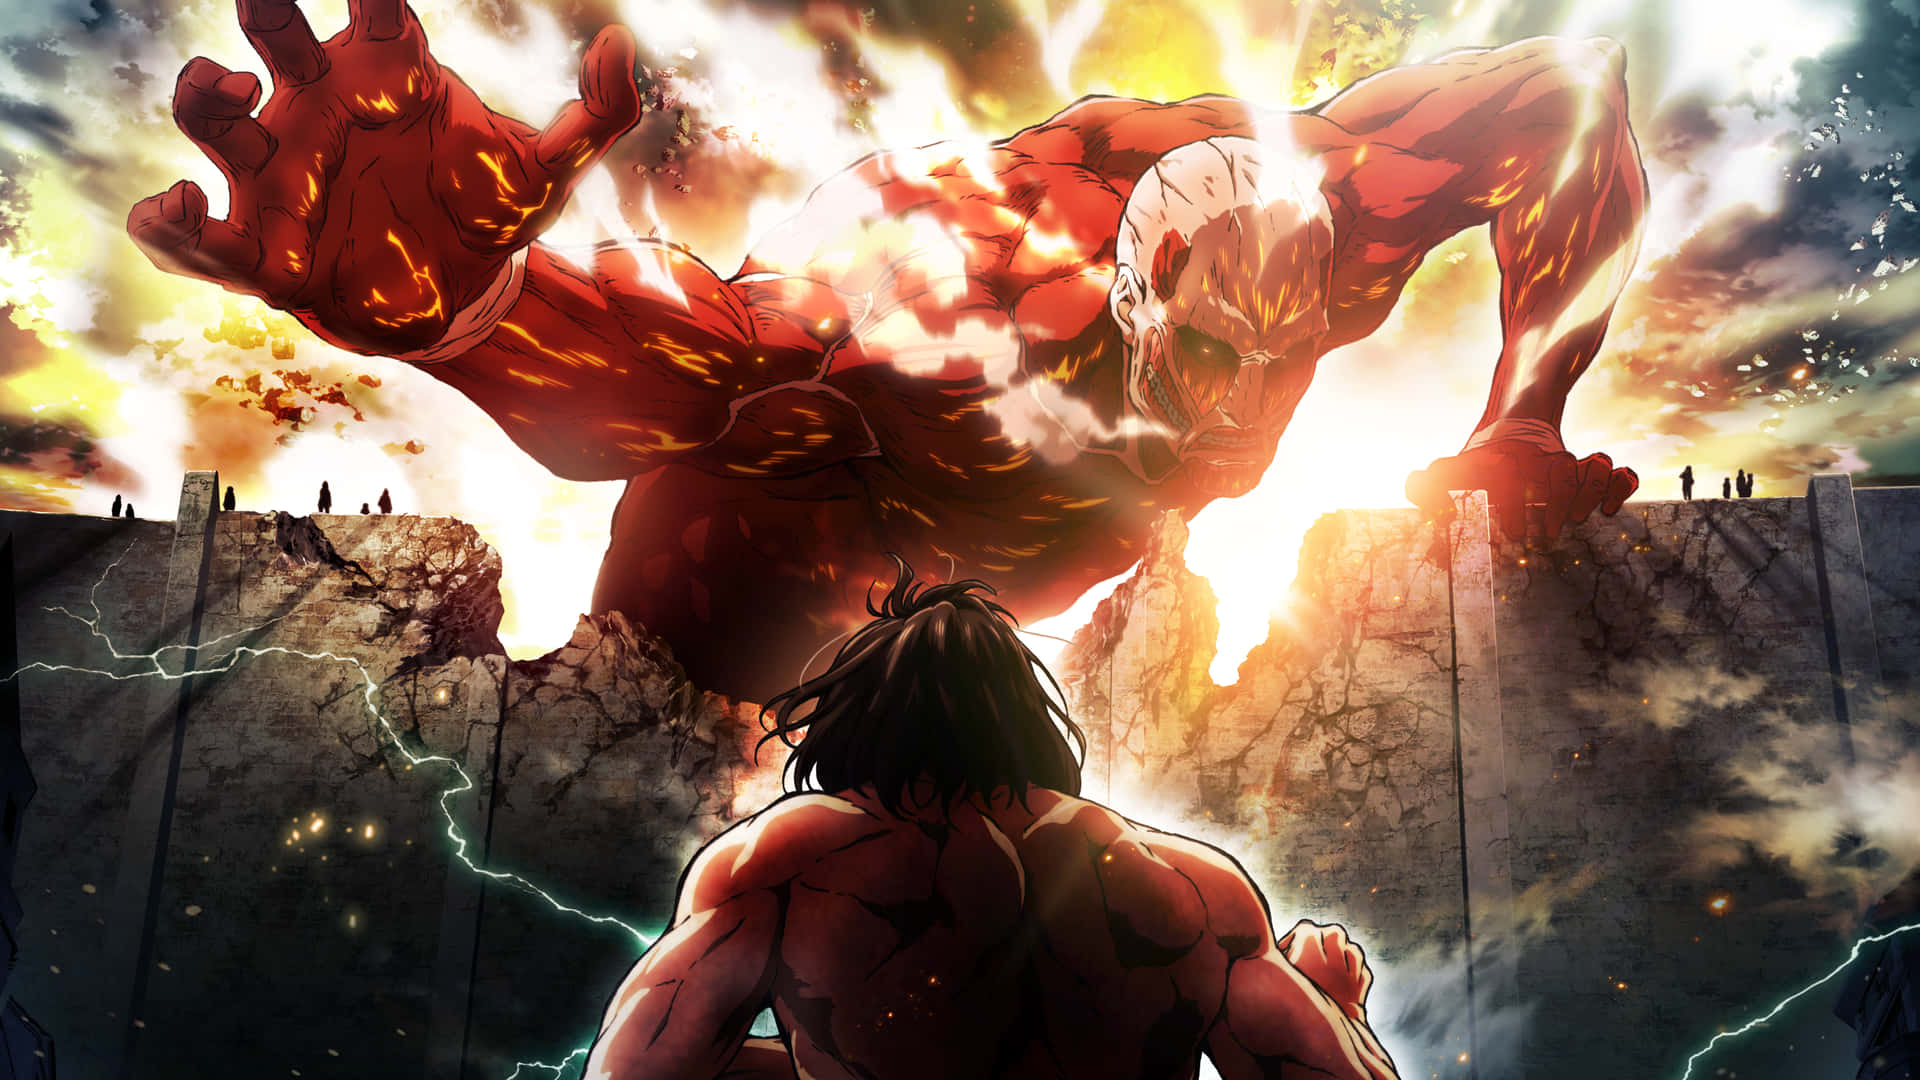 The struggle to save mankind in the gripping anime series Attack on Titan